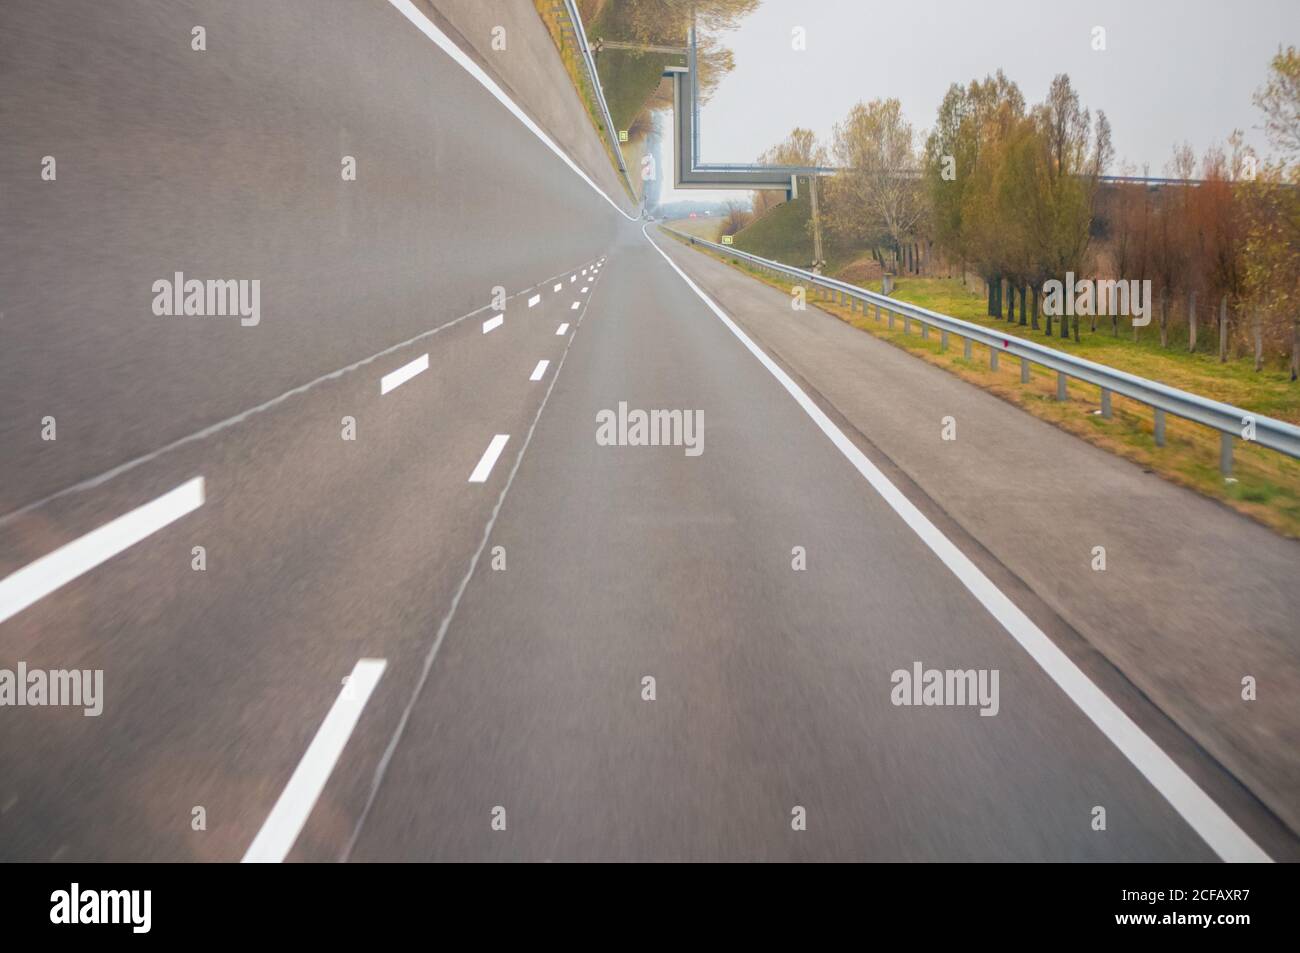 on the surreal highway under the bridge, unusual special effect Stock Photo